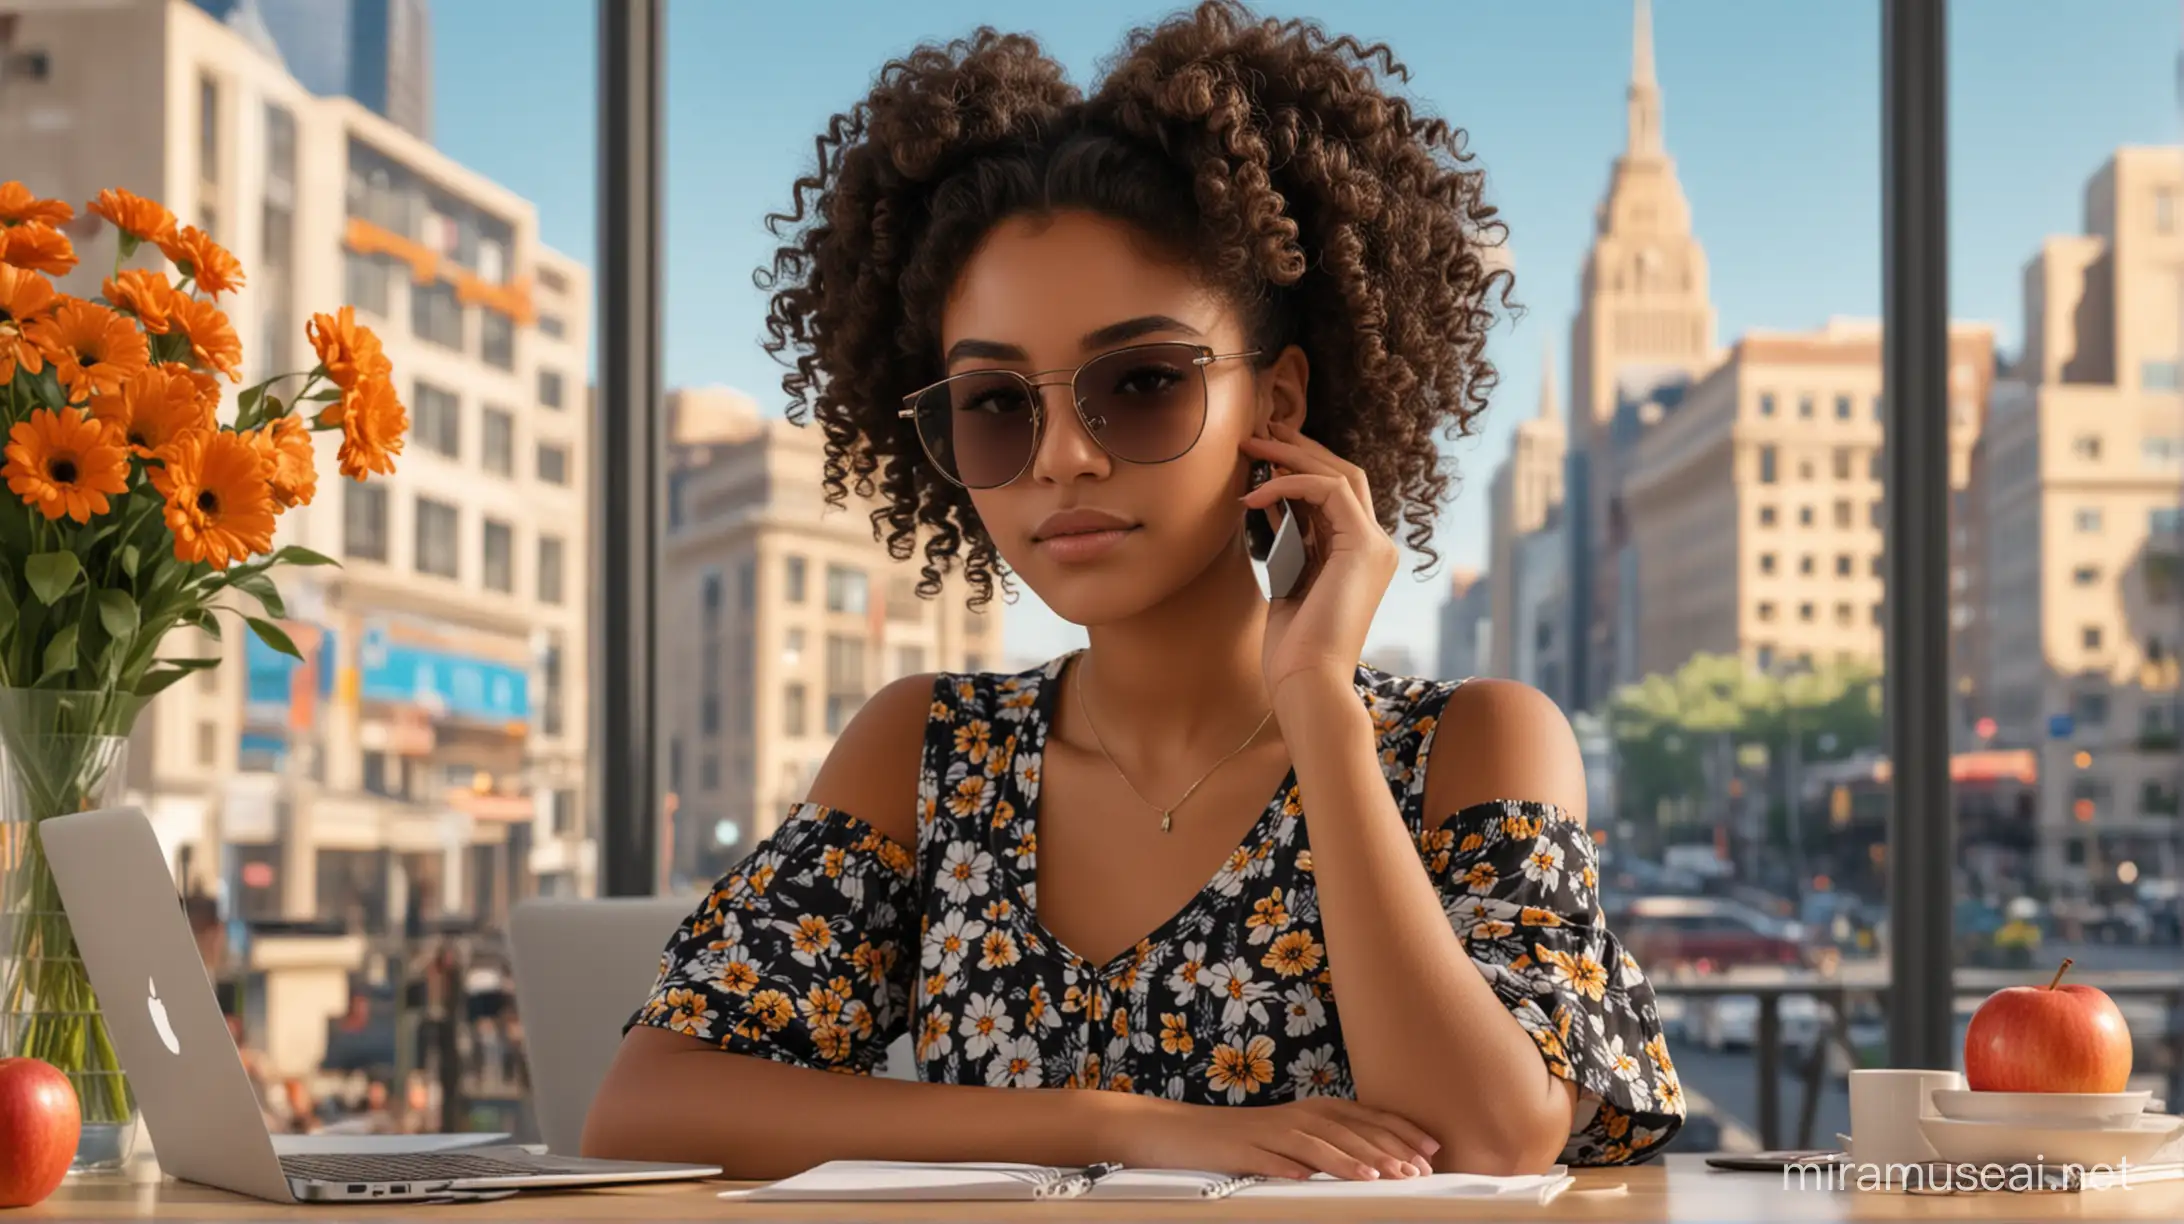 realistic 17 year old black girl, sitting at a desk with an Apple laptop, brown eyes, black curly hair in a bun, front facing, wearing matching sunglasses, front facing, with a background of a city, with flowers on the desk, phone on the desk